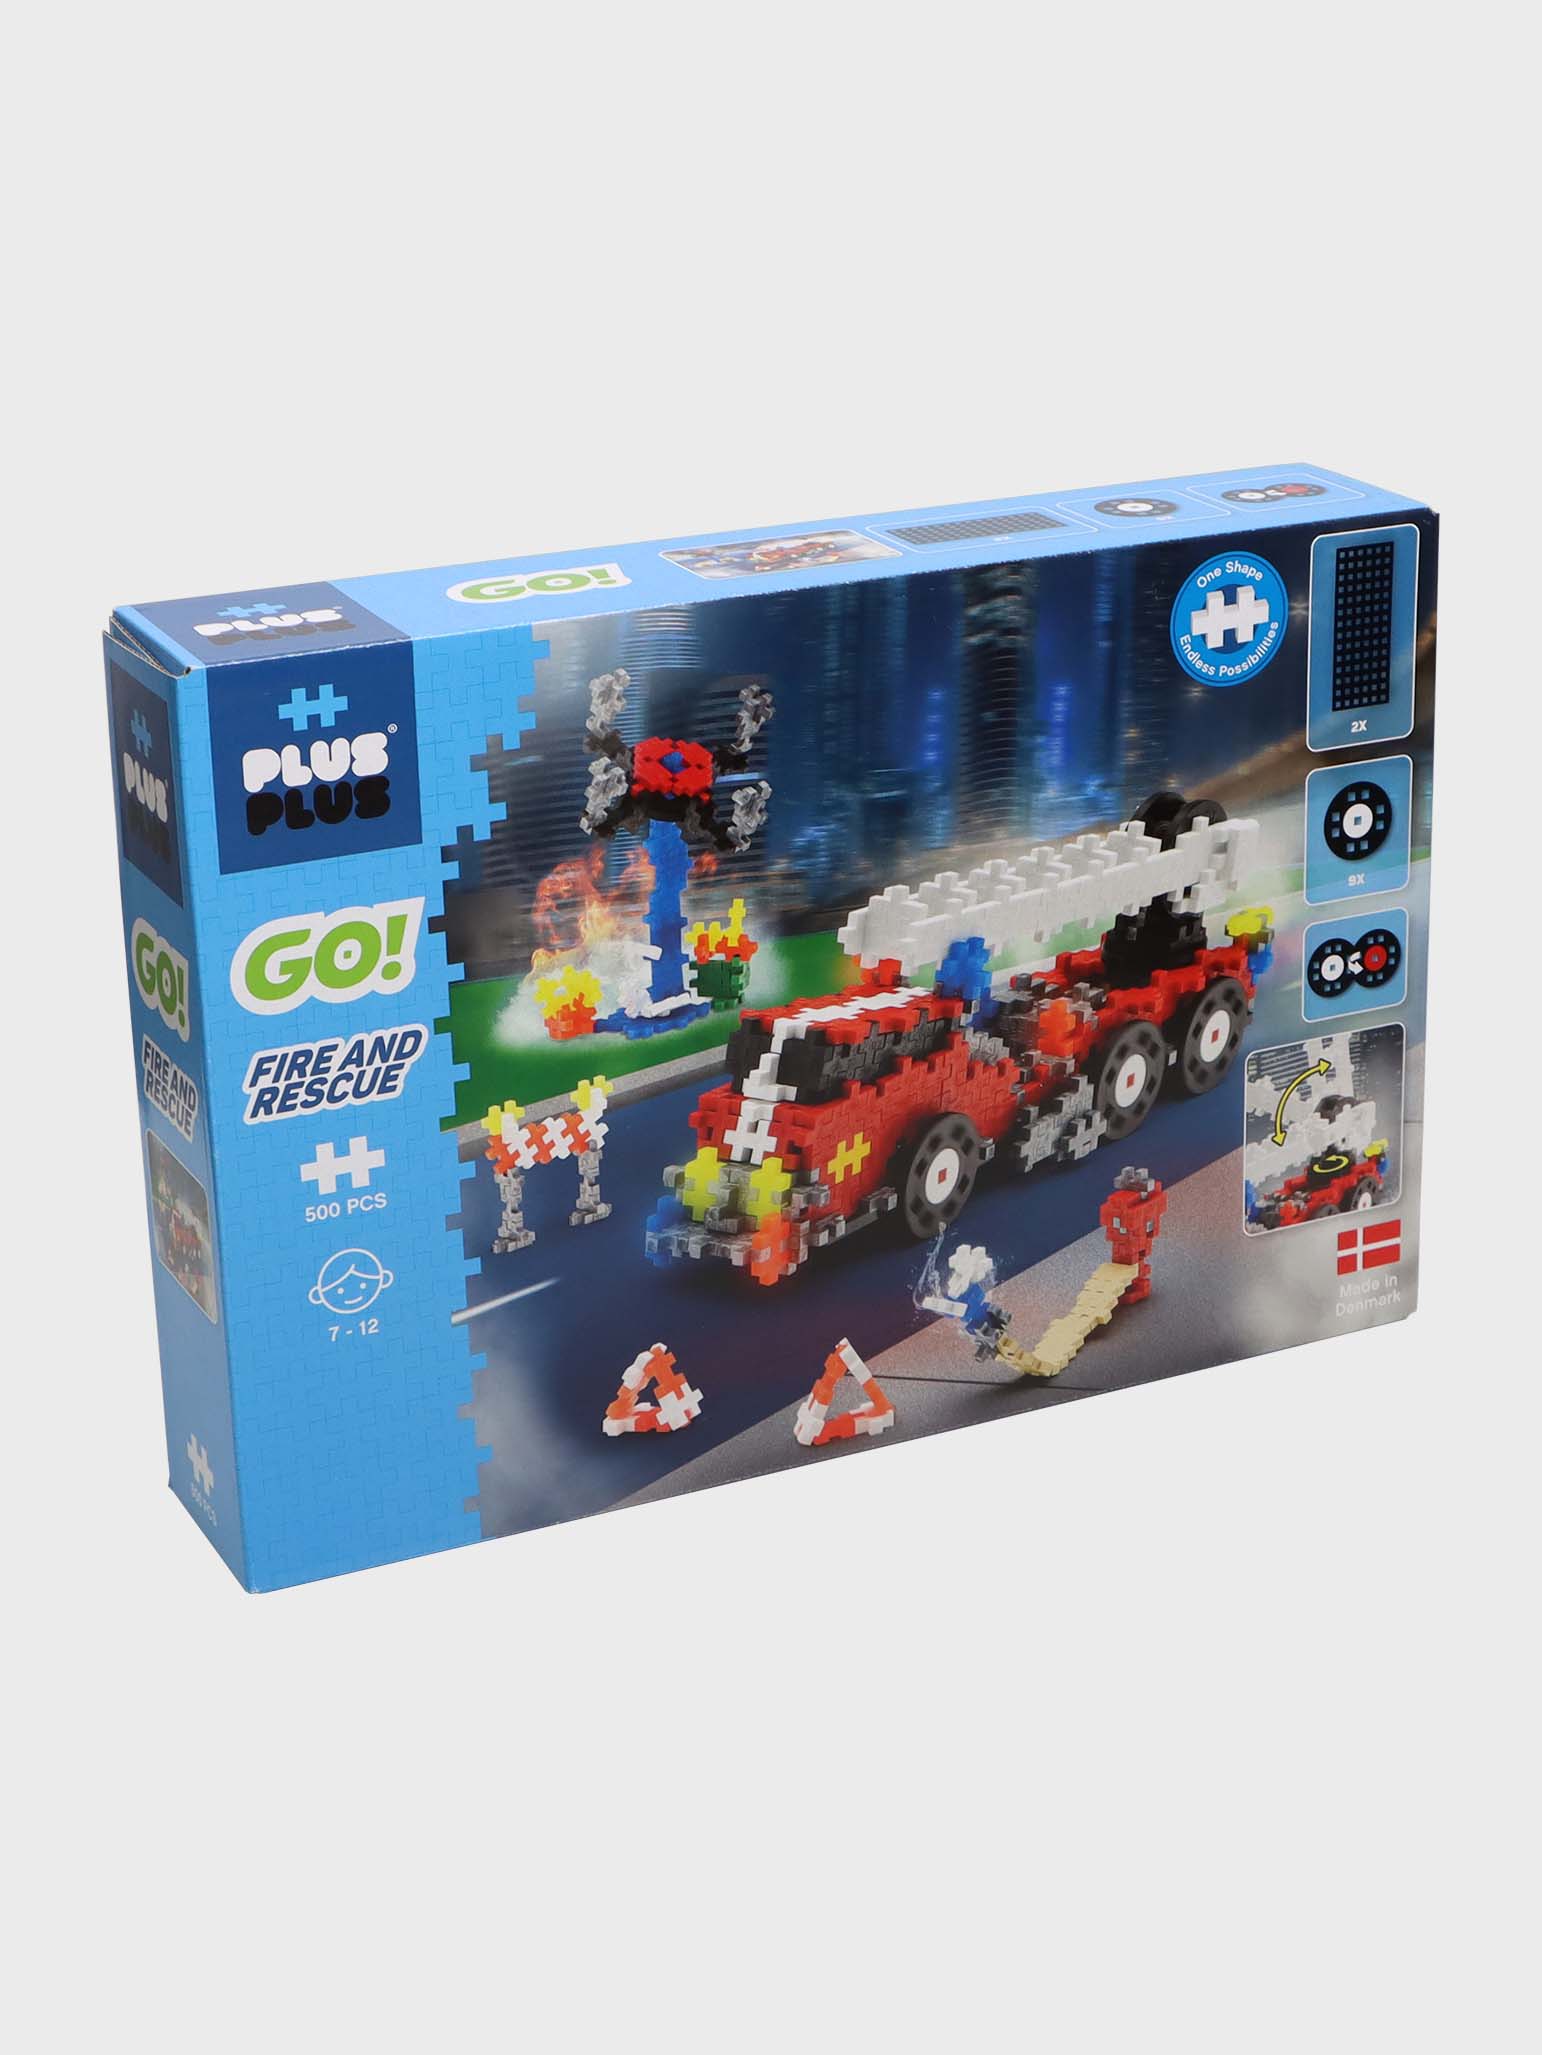 Go! Fire and Rescue 500pcs